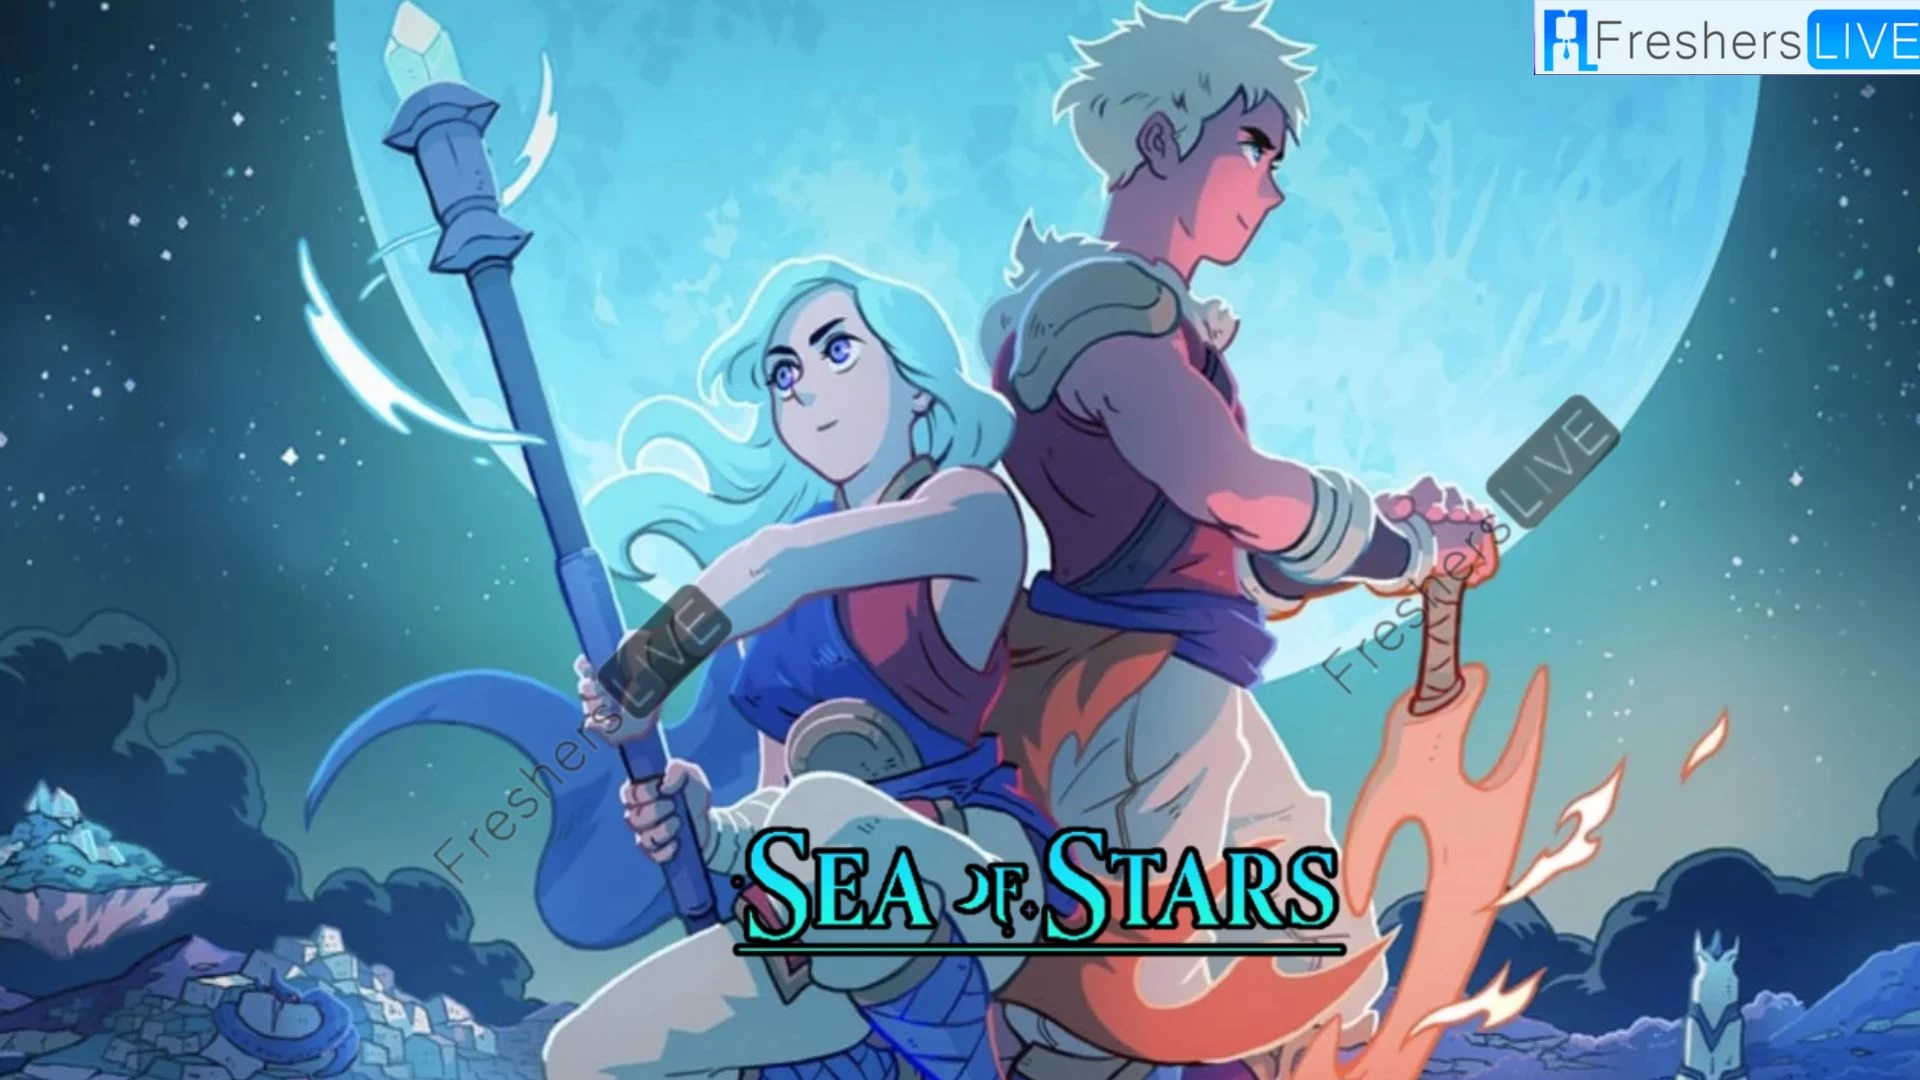 Sea of Stars Music sheet Locations: Where to find music Sheet in Sea of Stars?